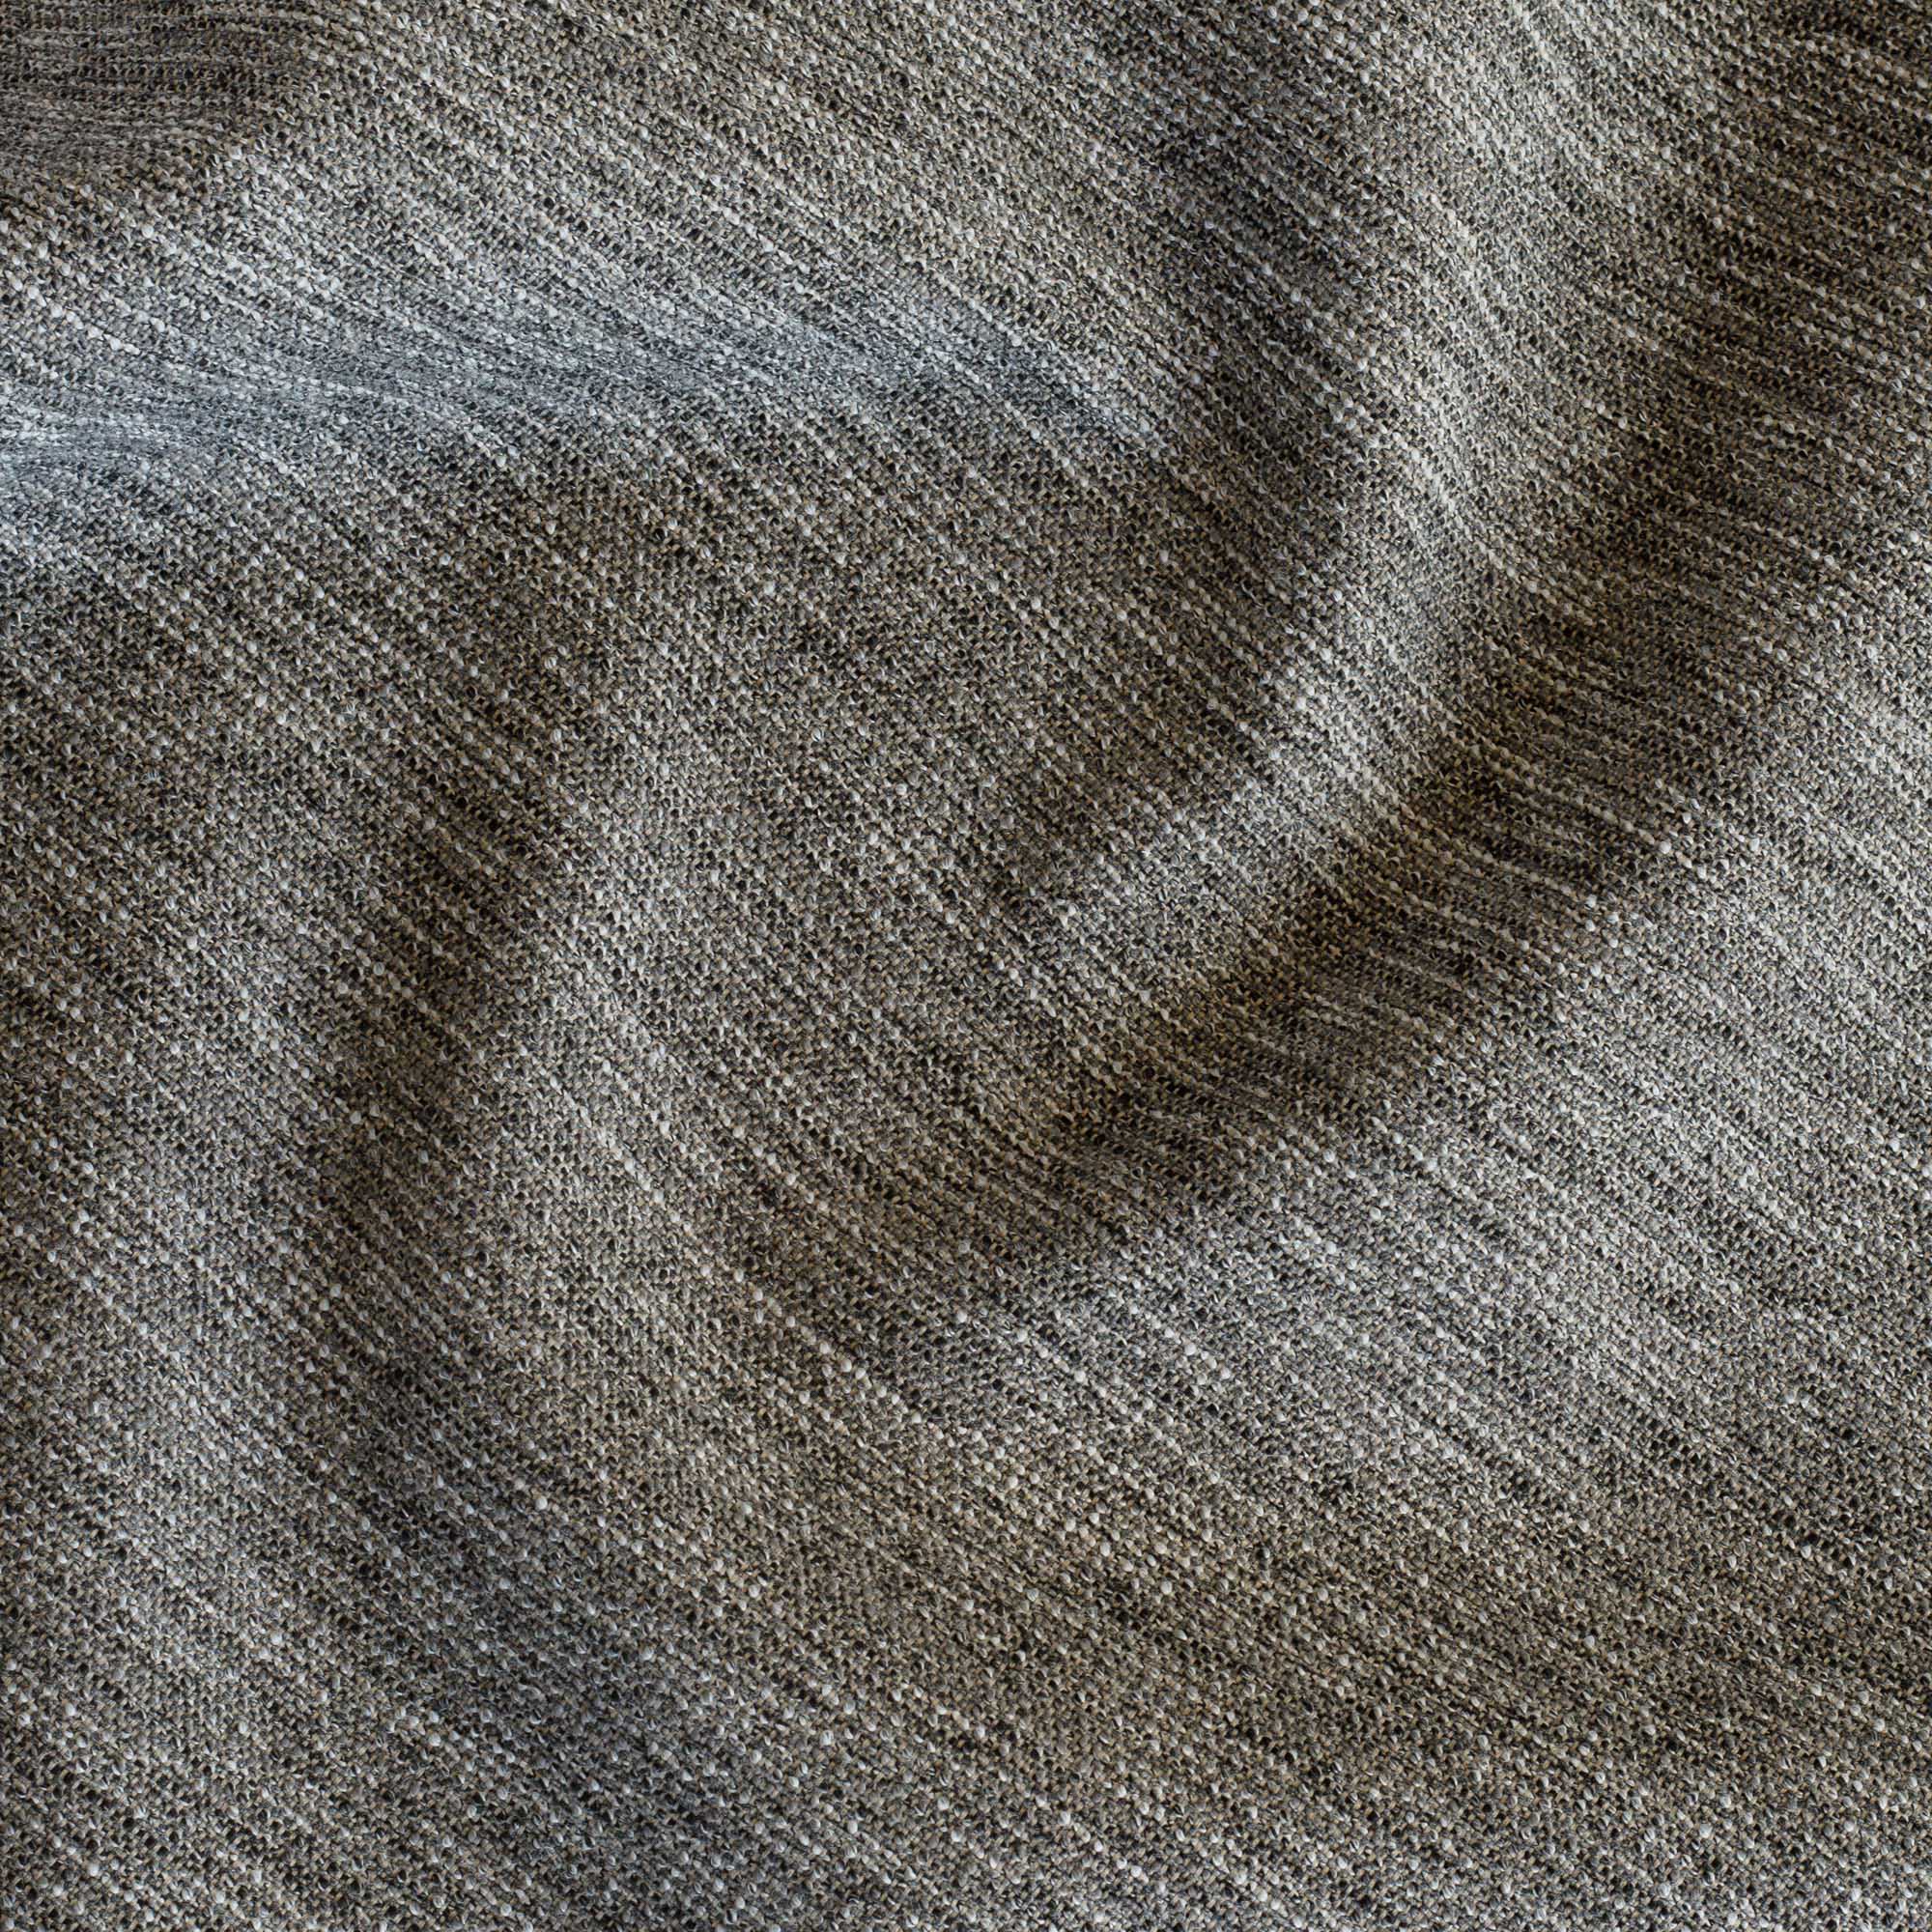 a charcoal gray and dark brown upholstery fabric